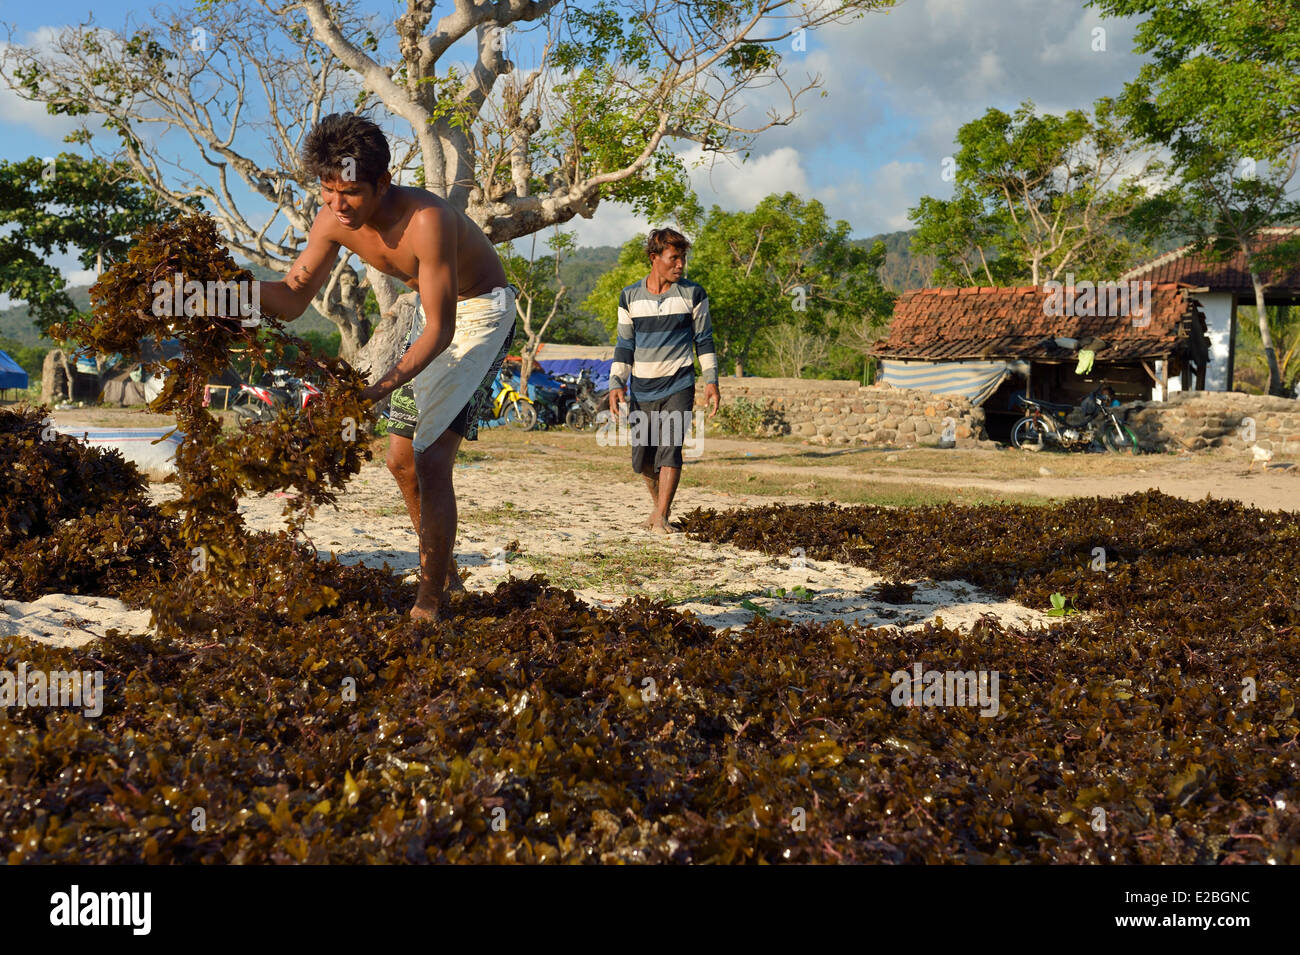 Indonesia, Sumbawa, seaweeds cultivation at Pantai Lakey, beach also famous for its surf breaks Stock Photo